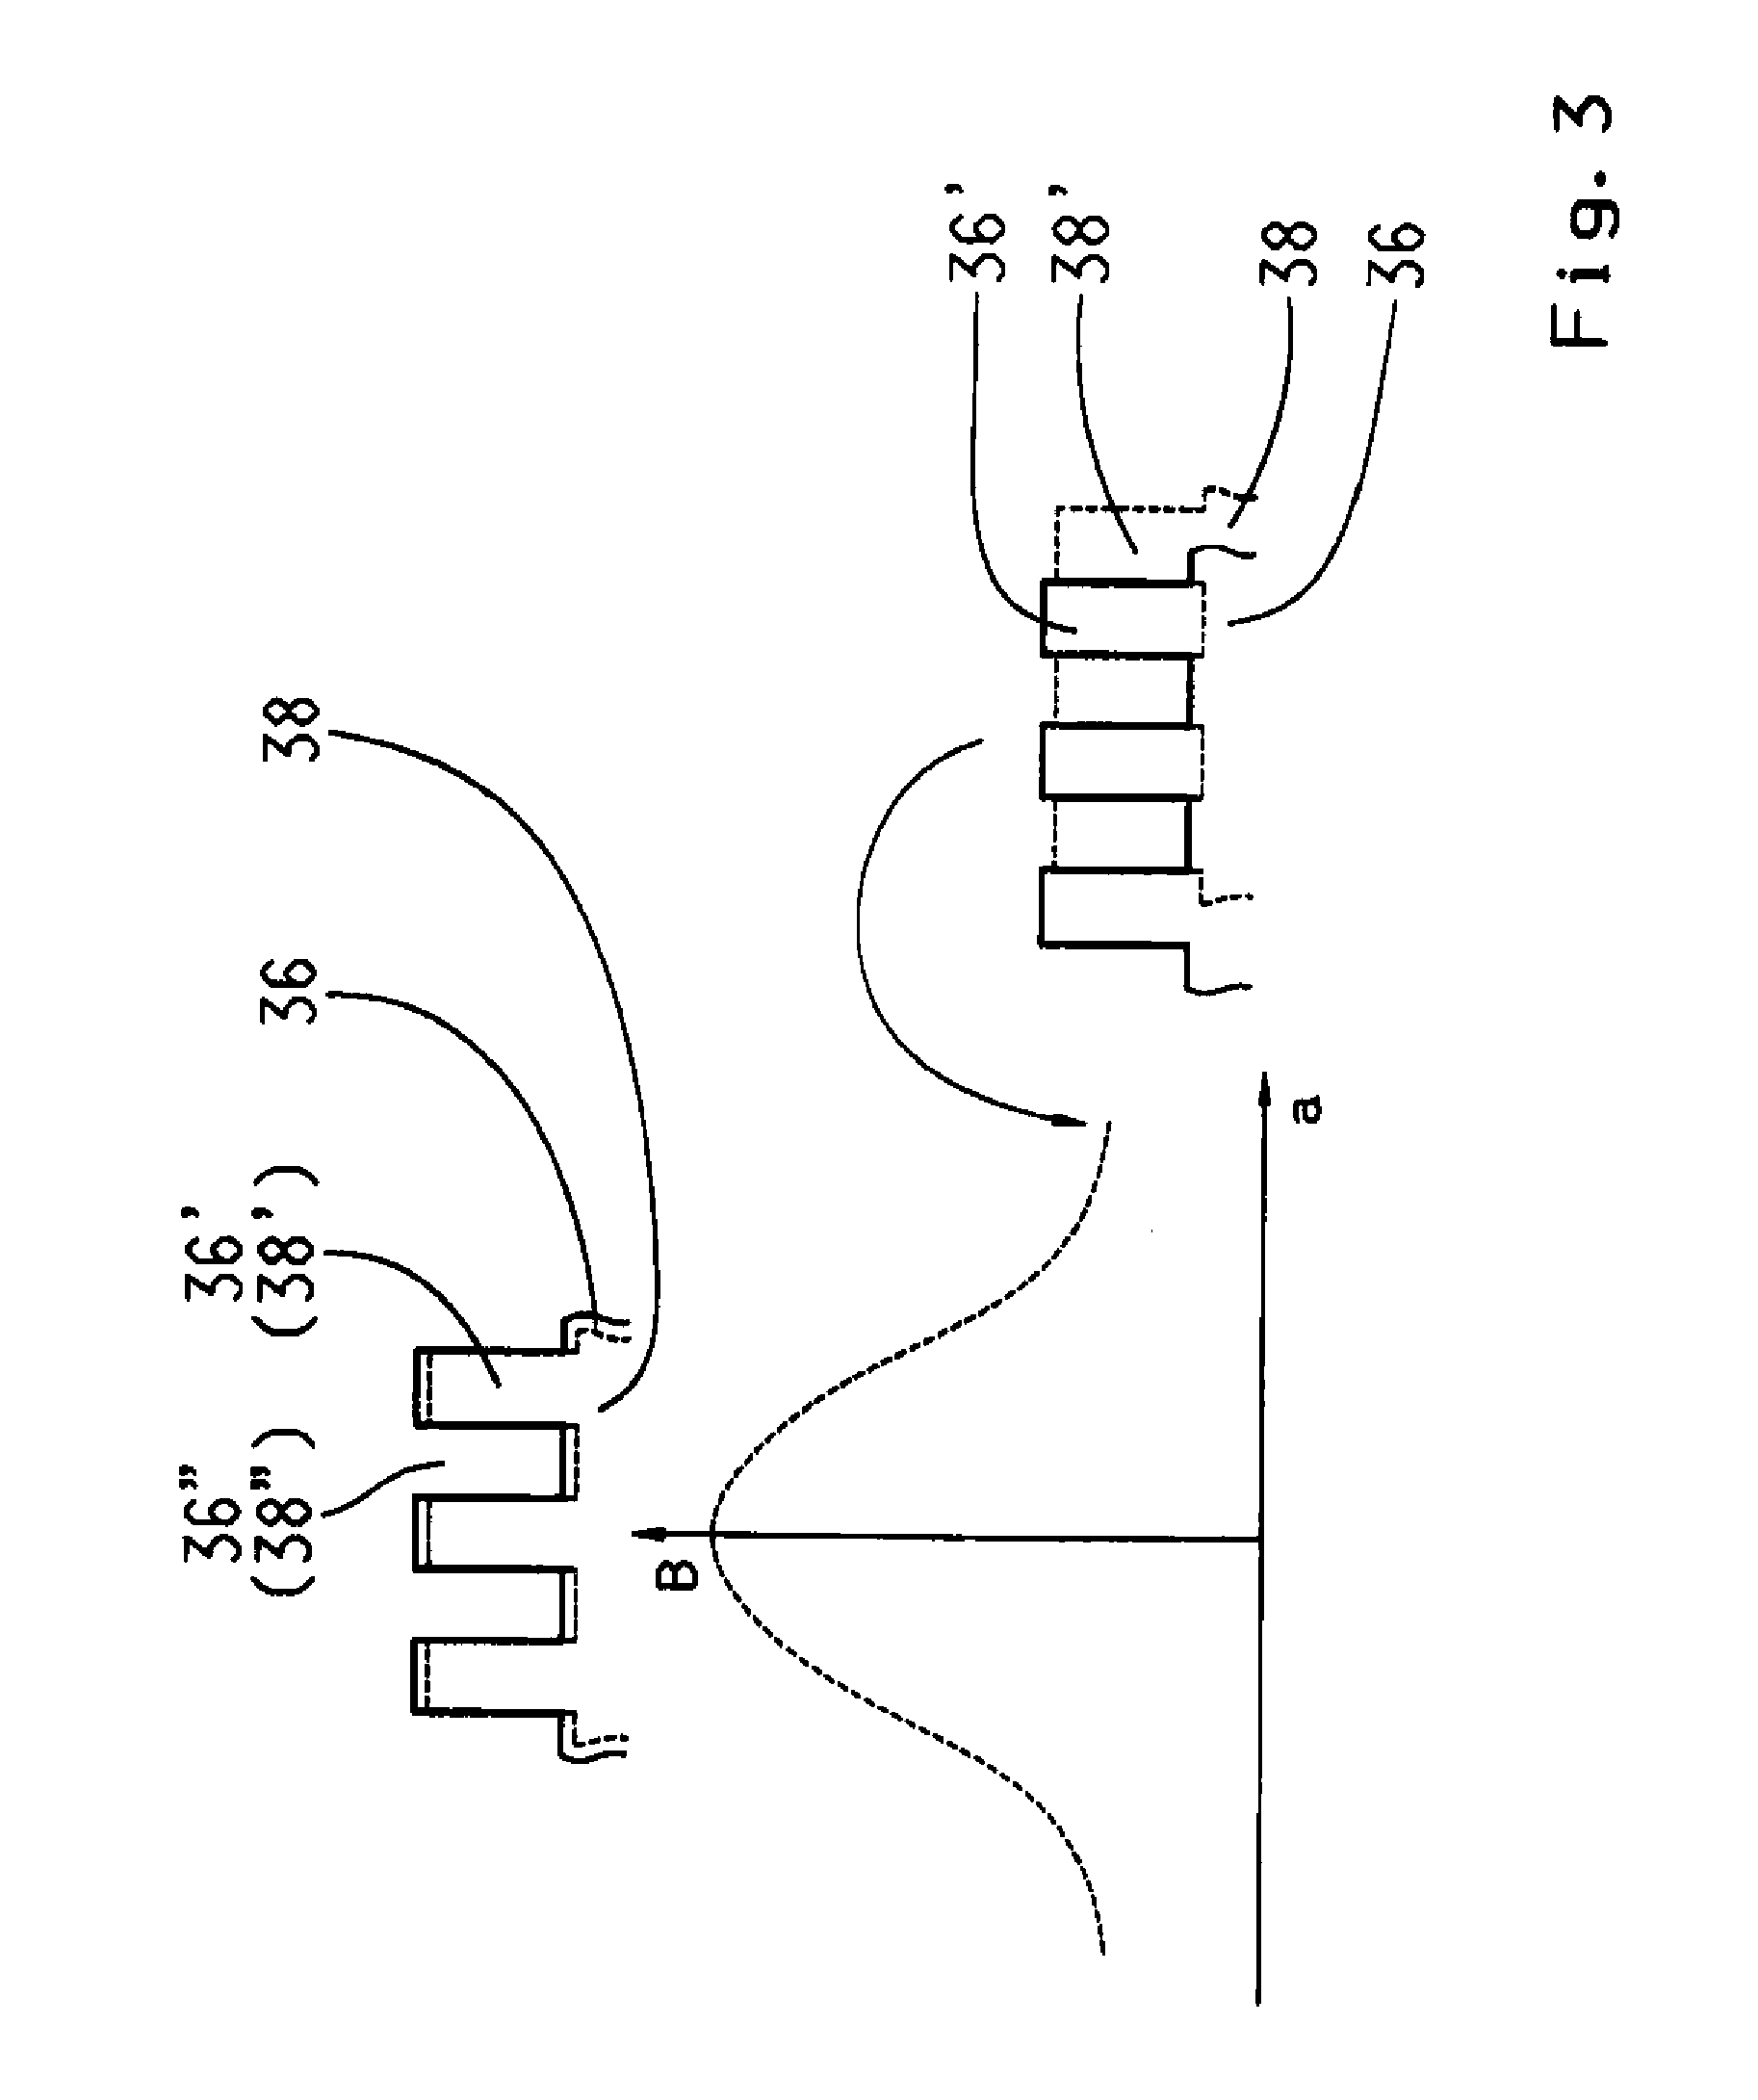 Method and device for the non-contact measurement of a displacement of components relative to one another